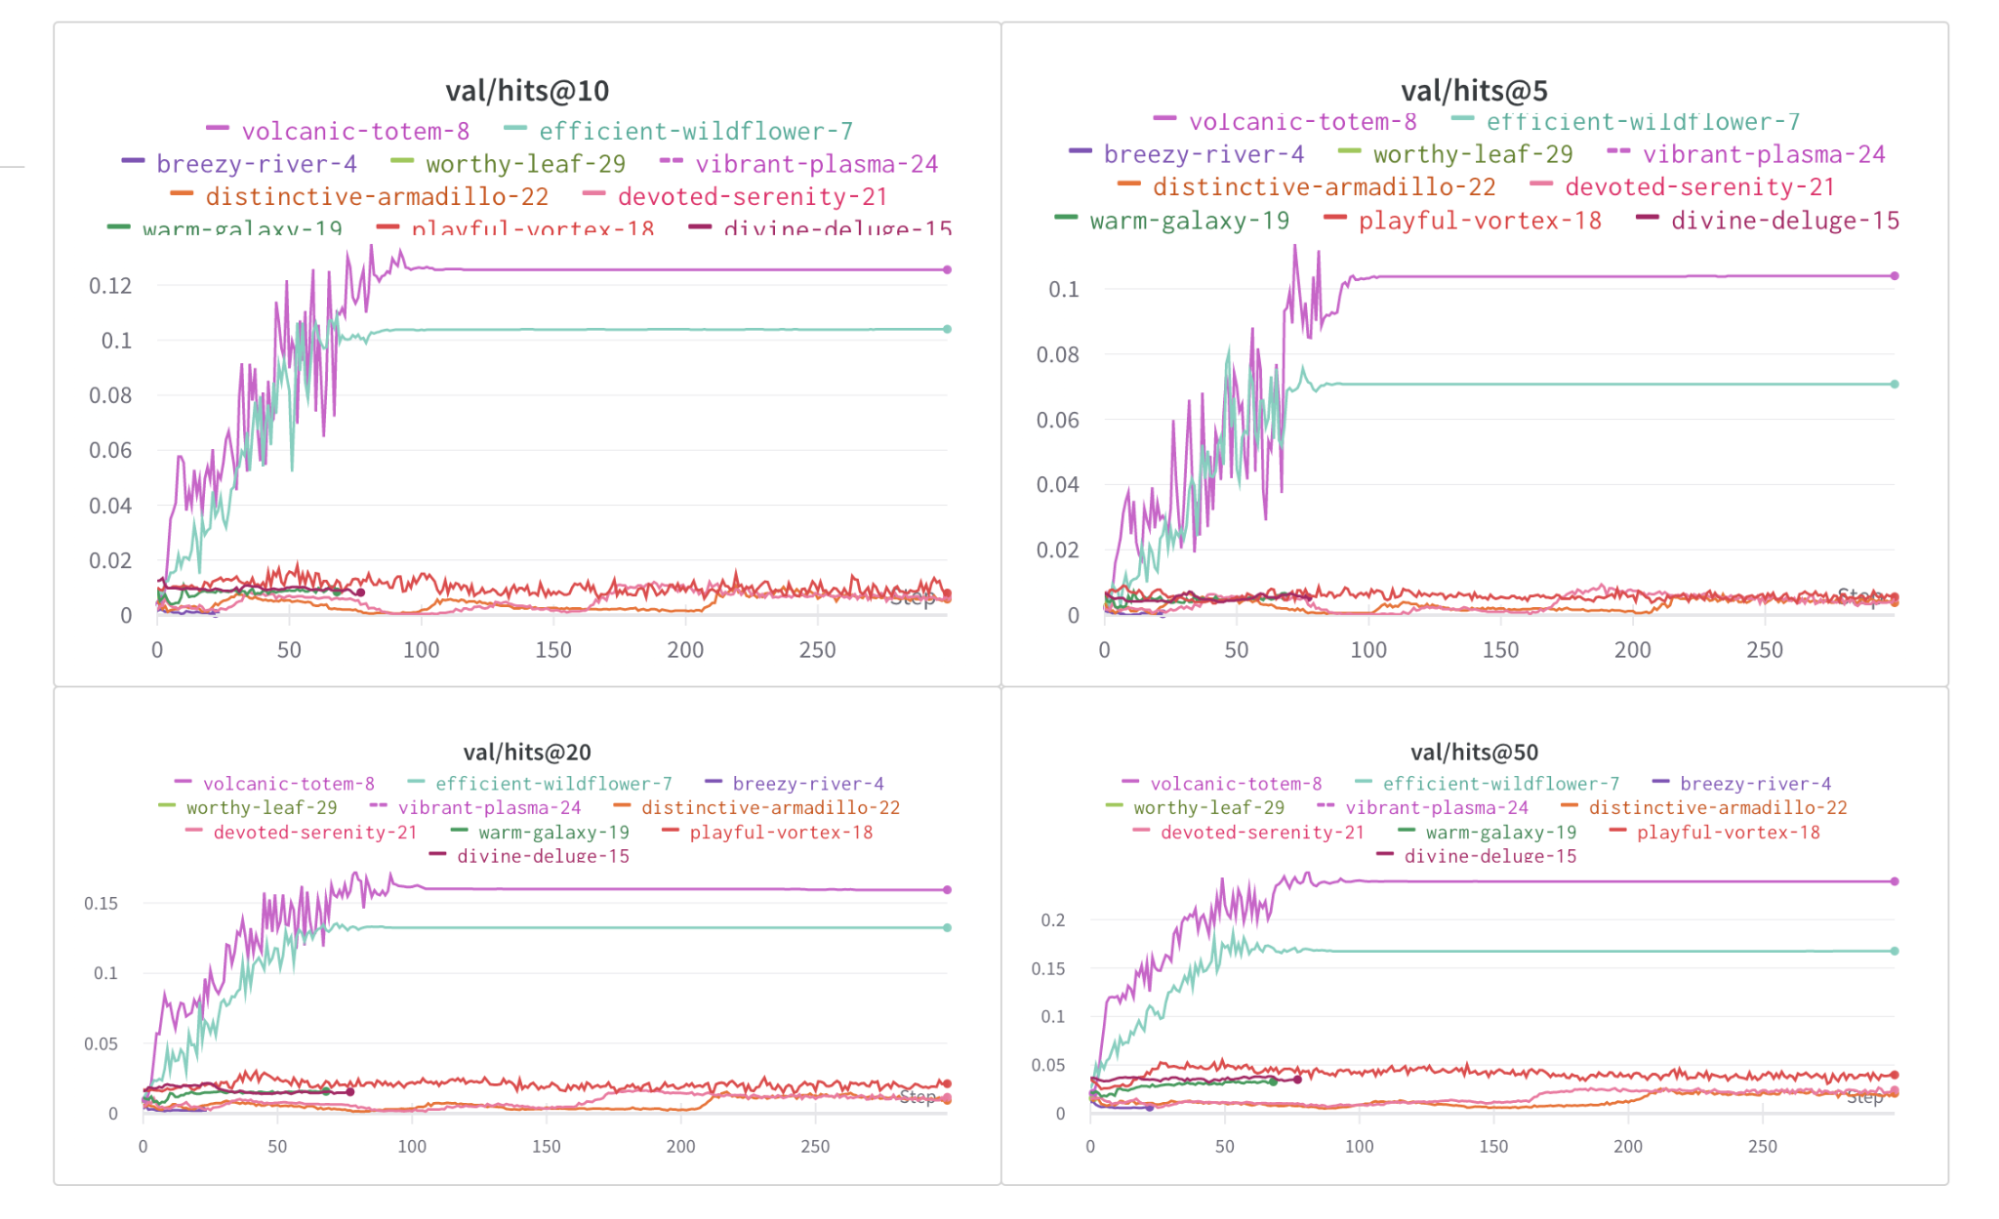 Plots from W&amp;B showing how the hits@K metric changes over epochs for different values of K.